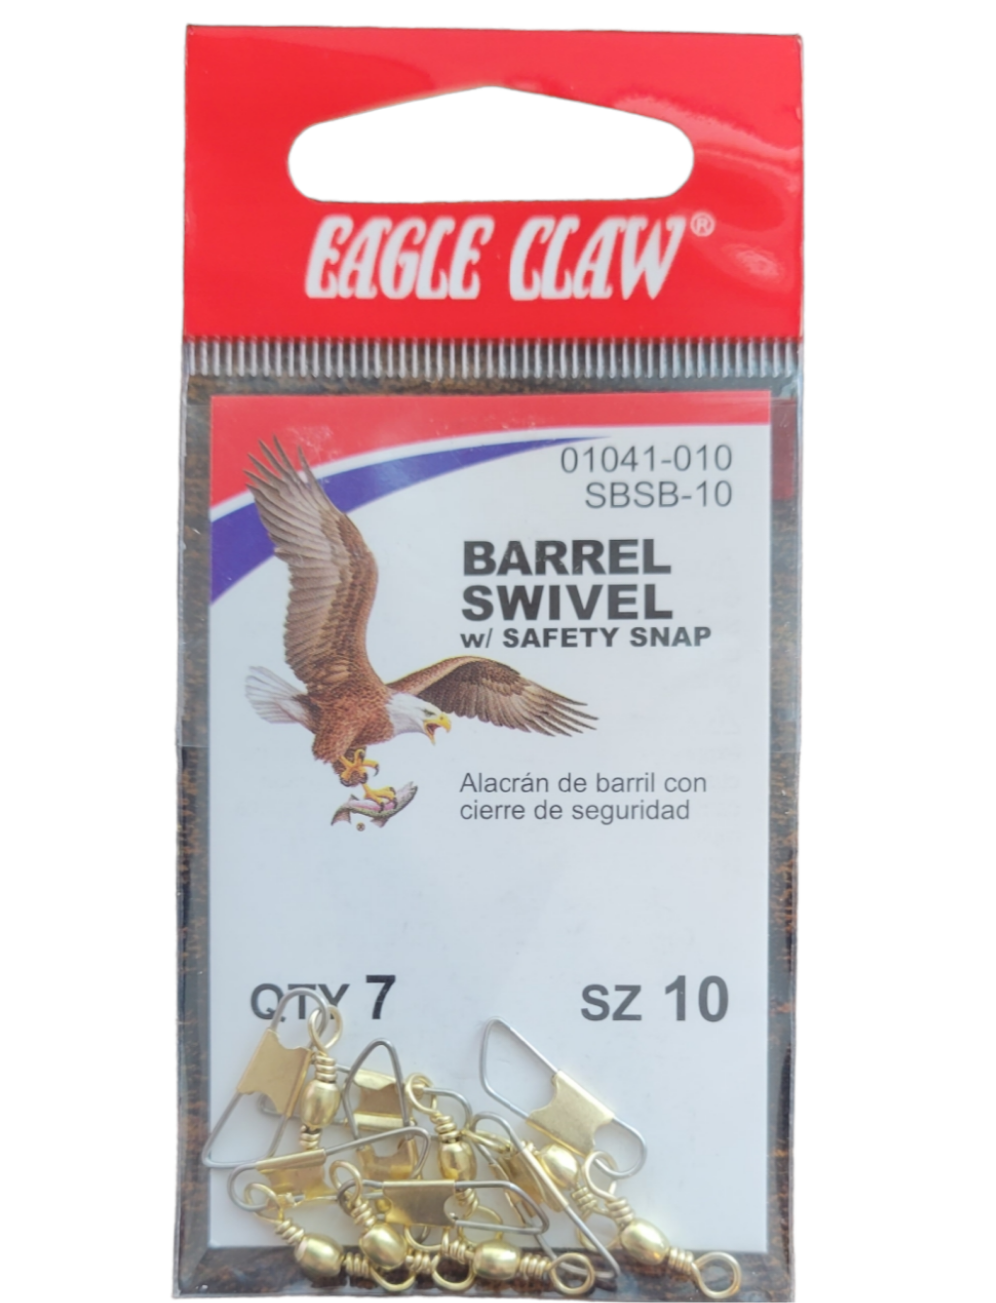 Eagle Claw Barrel Swivel with Safety snap